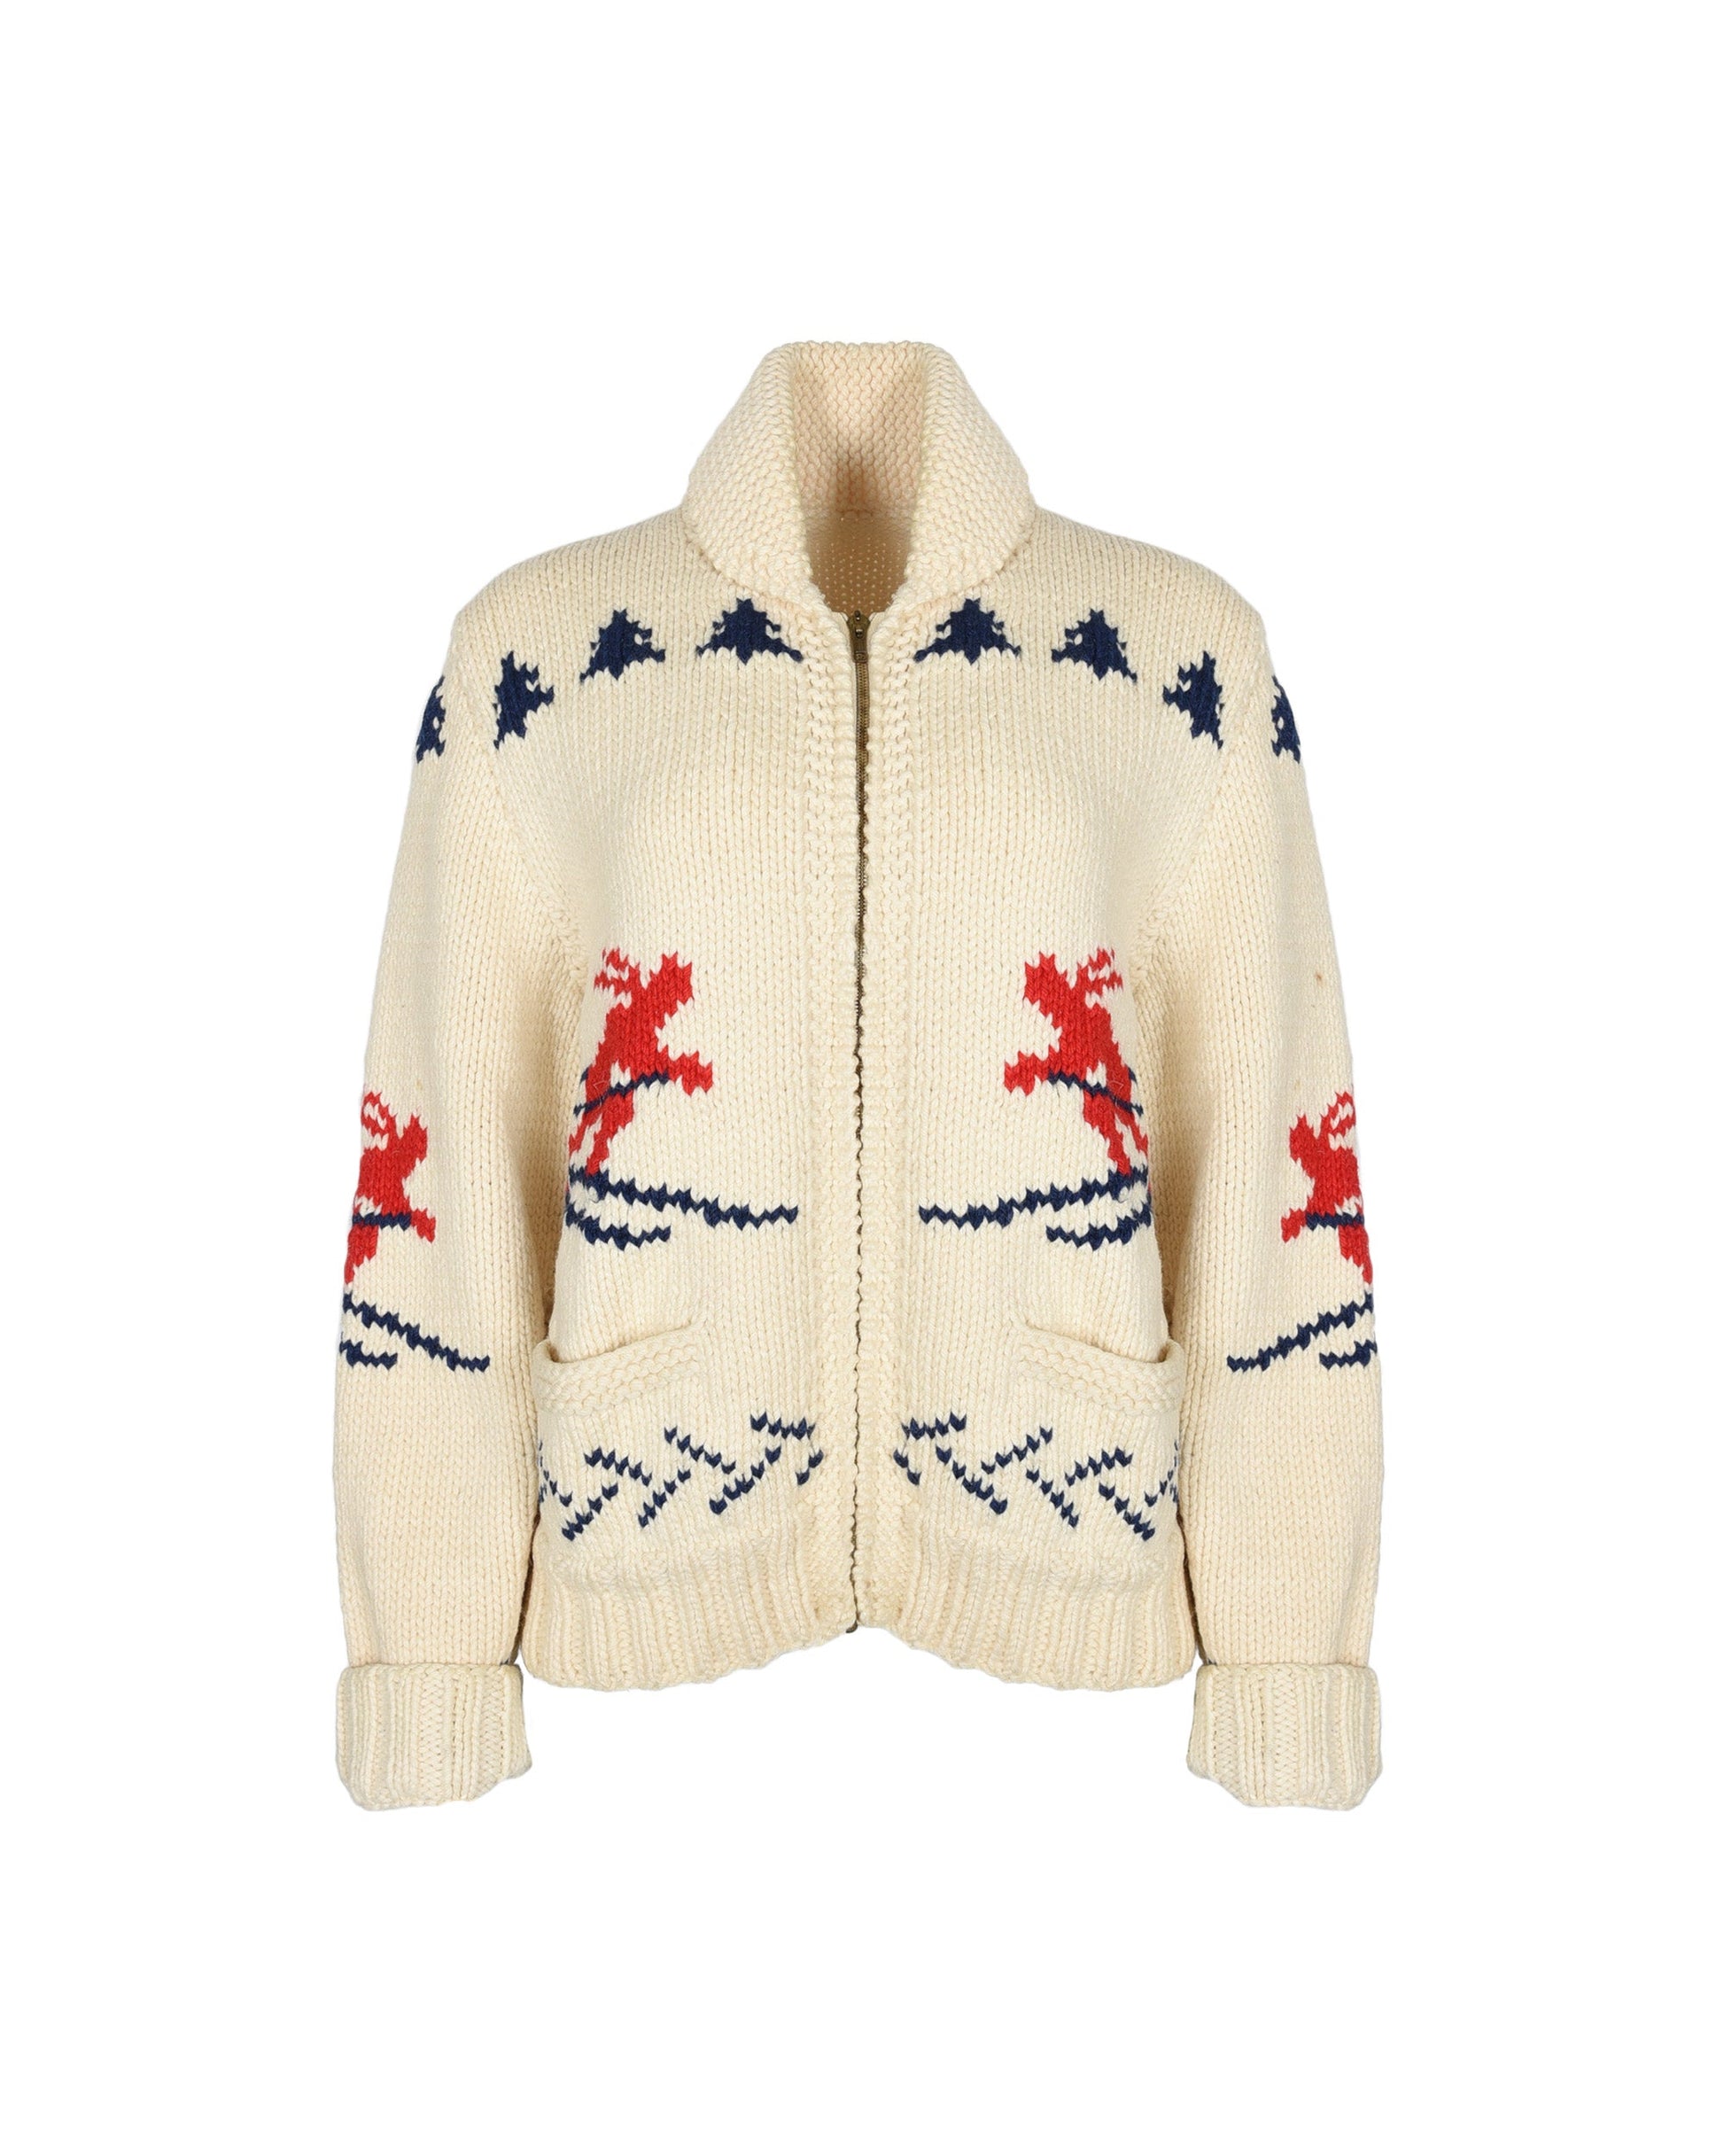 Cream Colored Zip-Up Cardigan, 1960s Cream Colored Zip-Up Cardigan with Red and Blue Ski Themed Cowichan Style Wool Sweater. Shoulder: 17, Bust: 20, Hip: 18